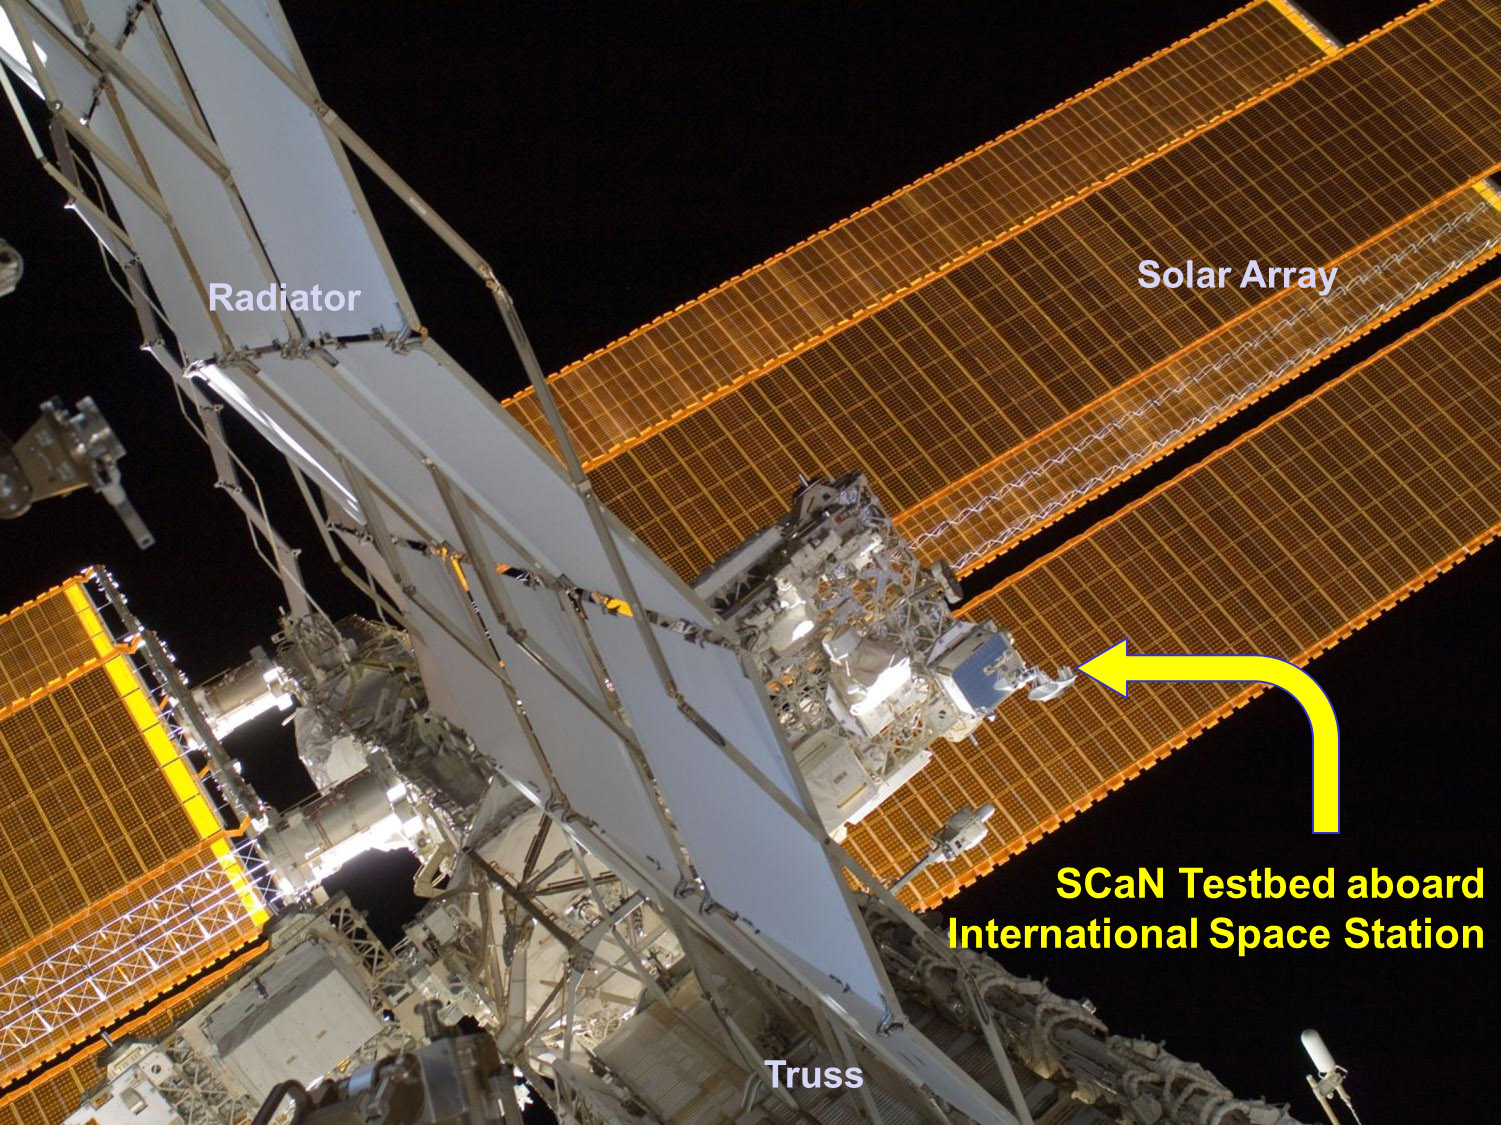 The SCaN Testbed payload aboard the space station. In April 2013, it began conducting experiments after completing its checkout and commissioning operations.